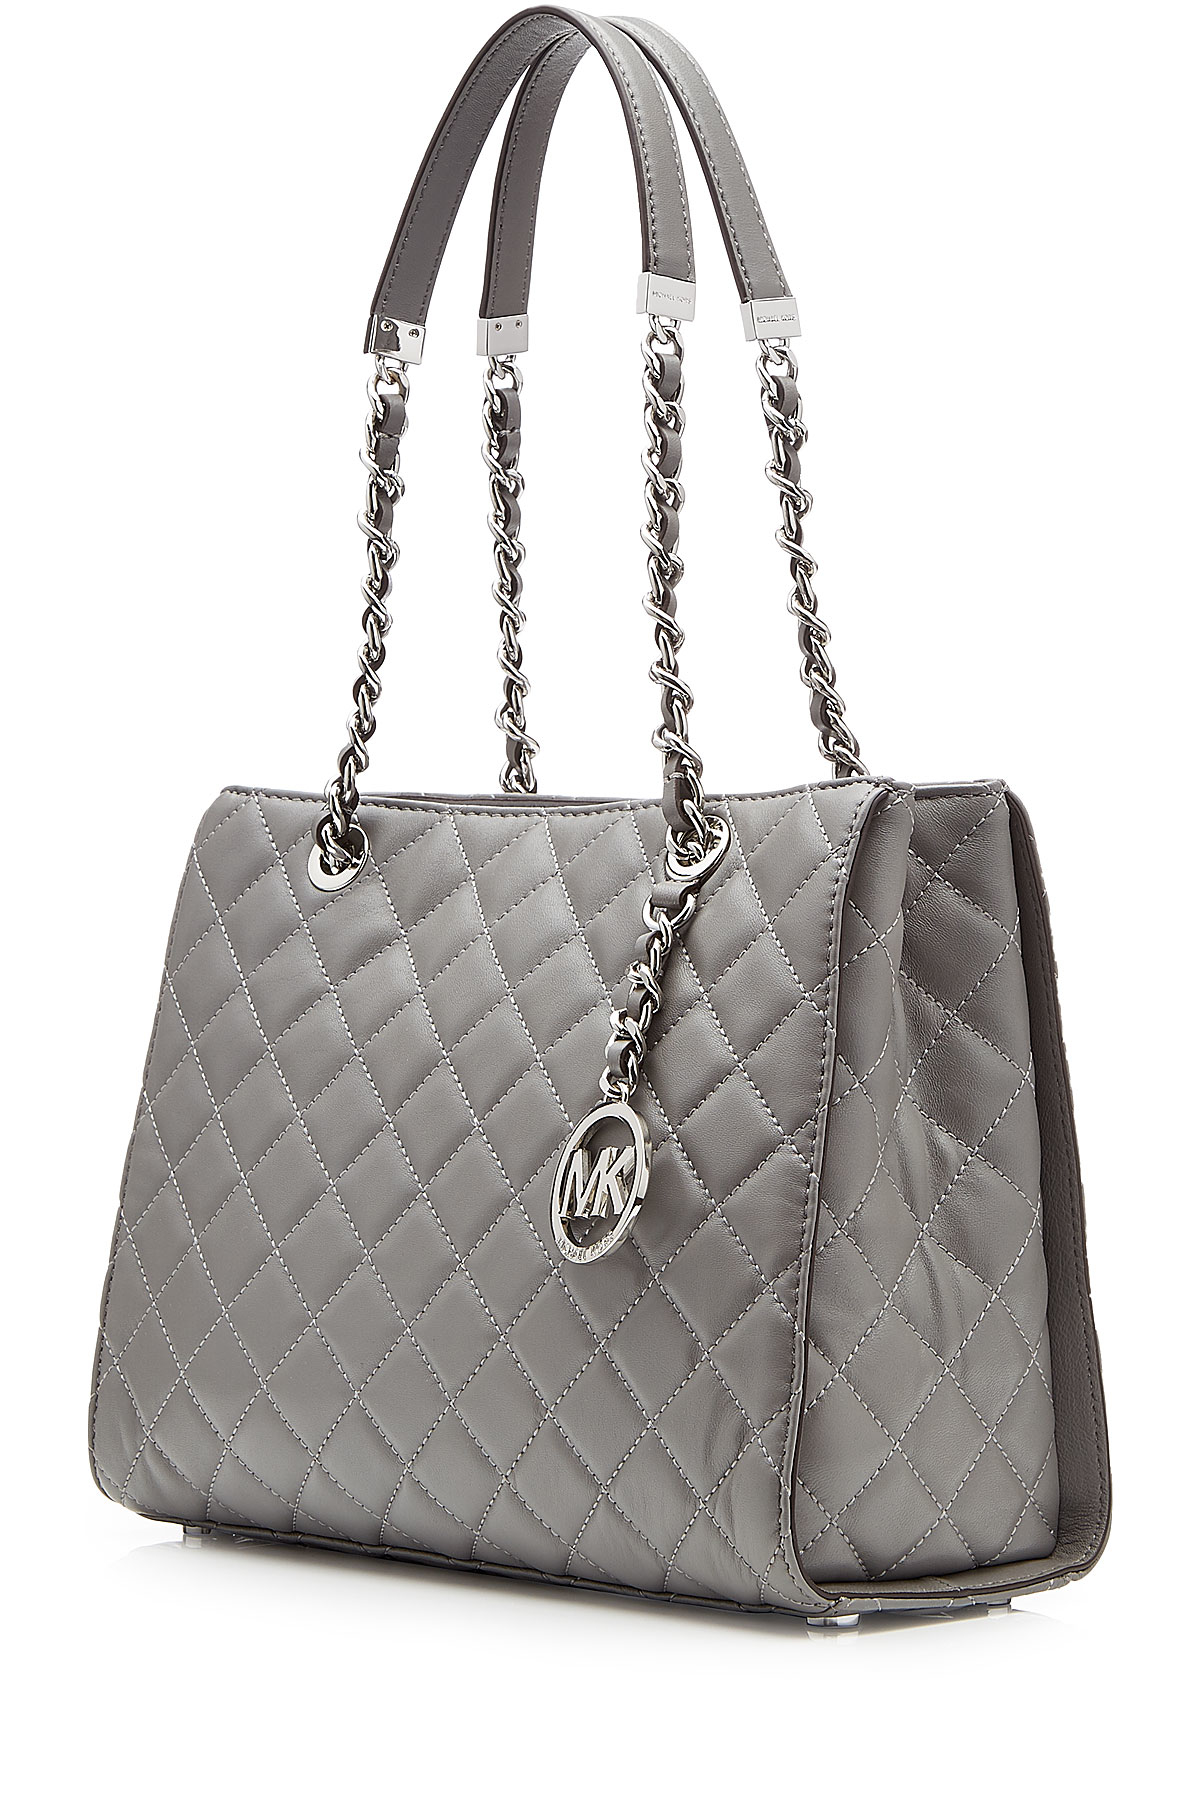 MICHAEL Michael Kors Susannah Large Quilted Leather Tote - Grey in Gray - Lyst